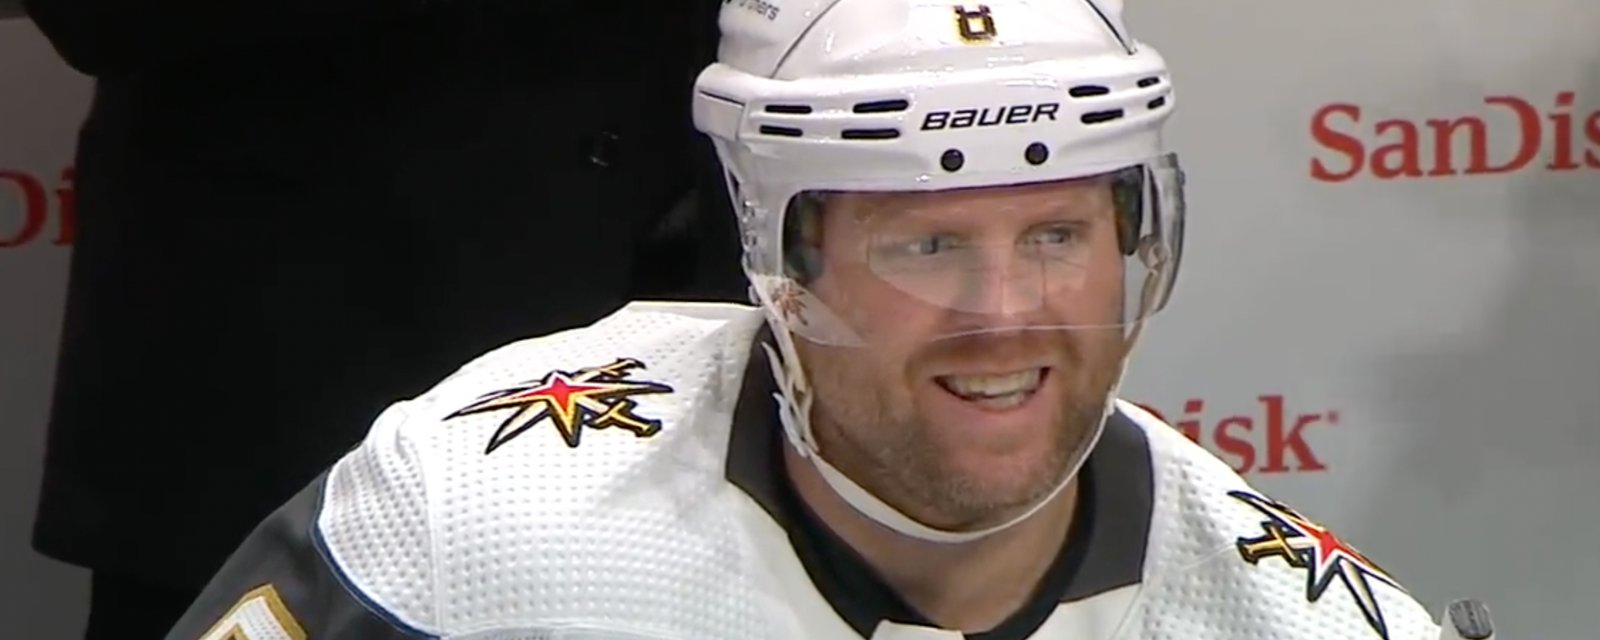 Phil Kessel has hilarious reaction when asked to comment his Ironman record